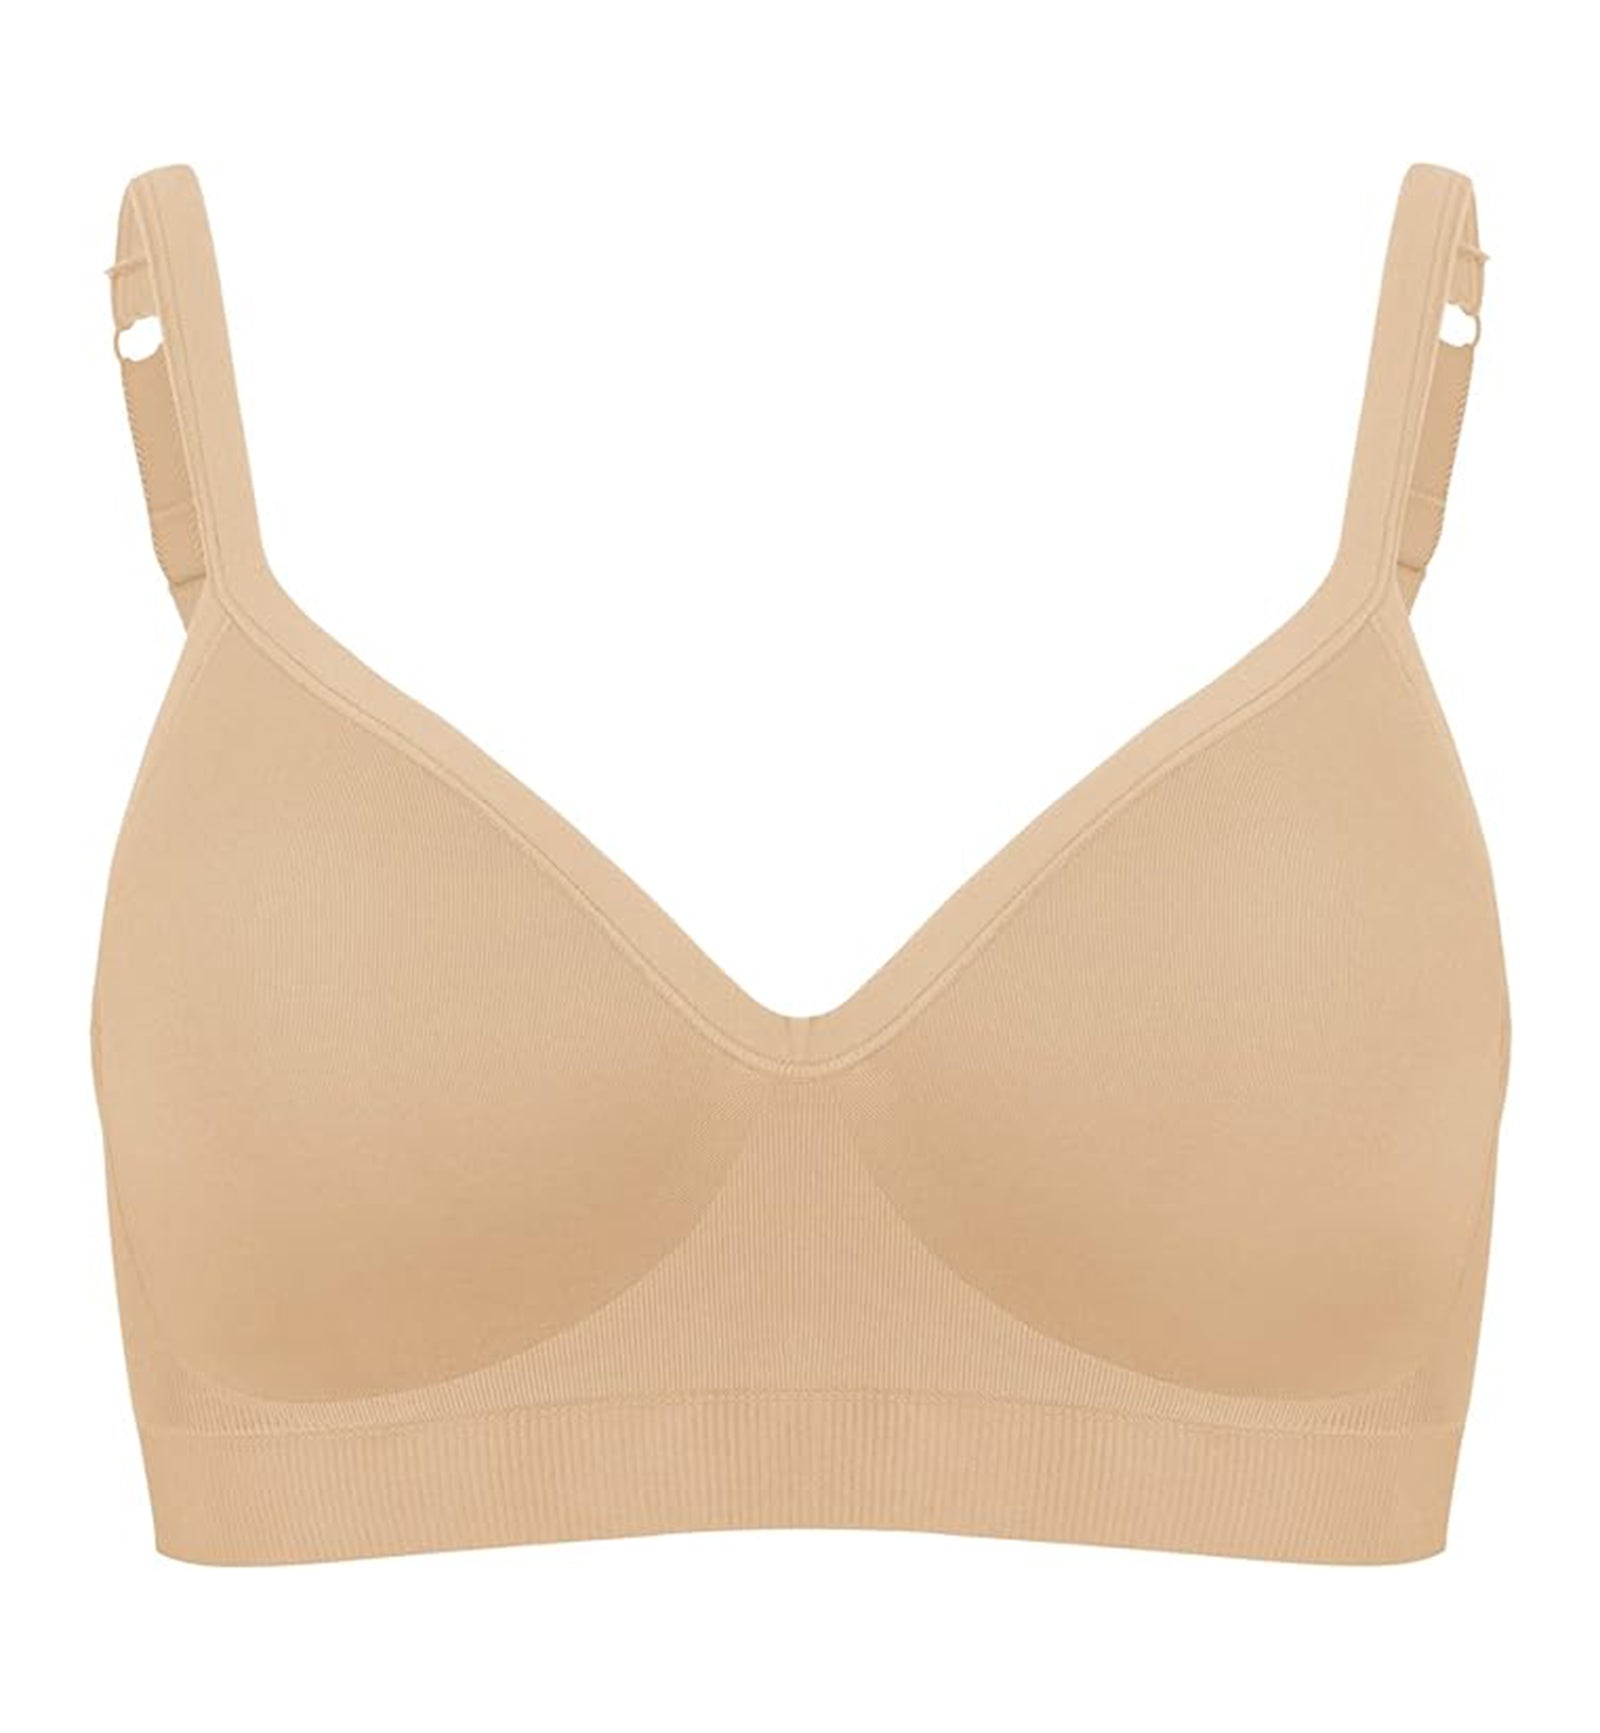 BRAVADO! DESIGNS Everyday Muse Plunge FULL CUP Wire-Free Bra (11012VFC),XS FC,Butterscotch - Butterscotch,XS-Full Cup